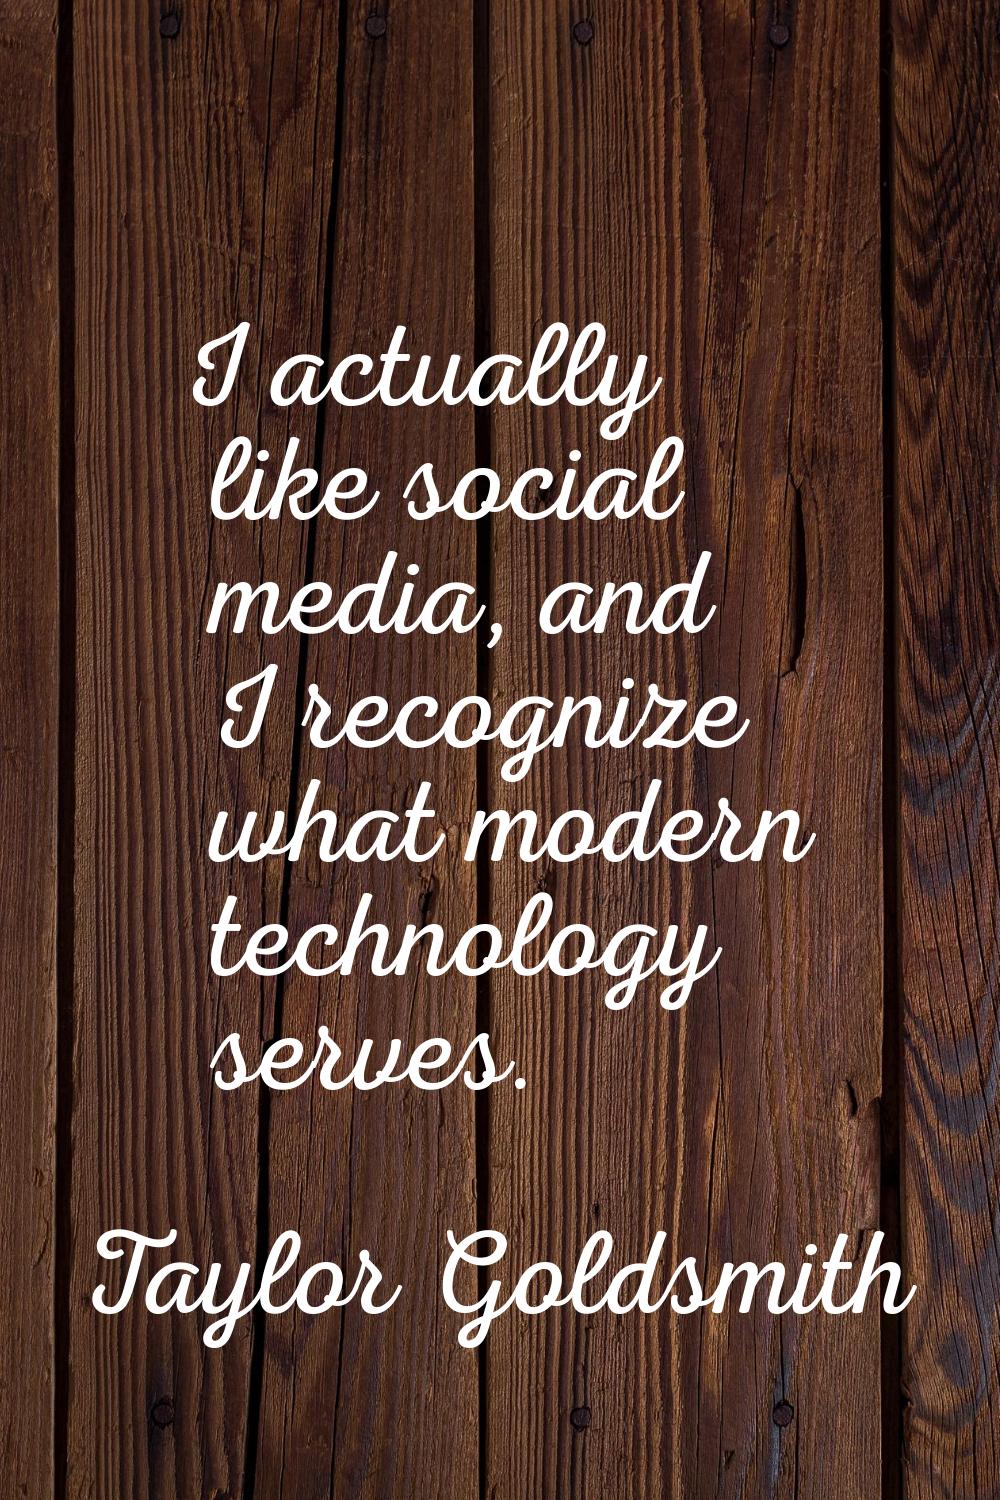 I actually like social media, and I recognize what modern technology serves.